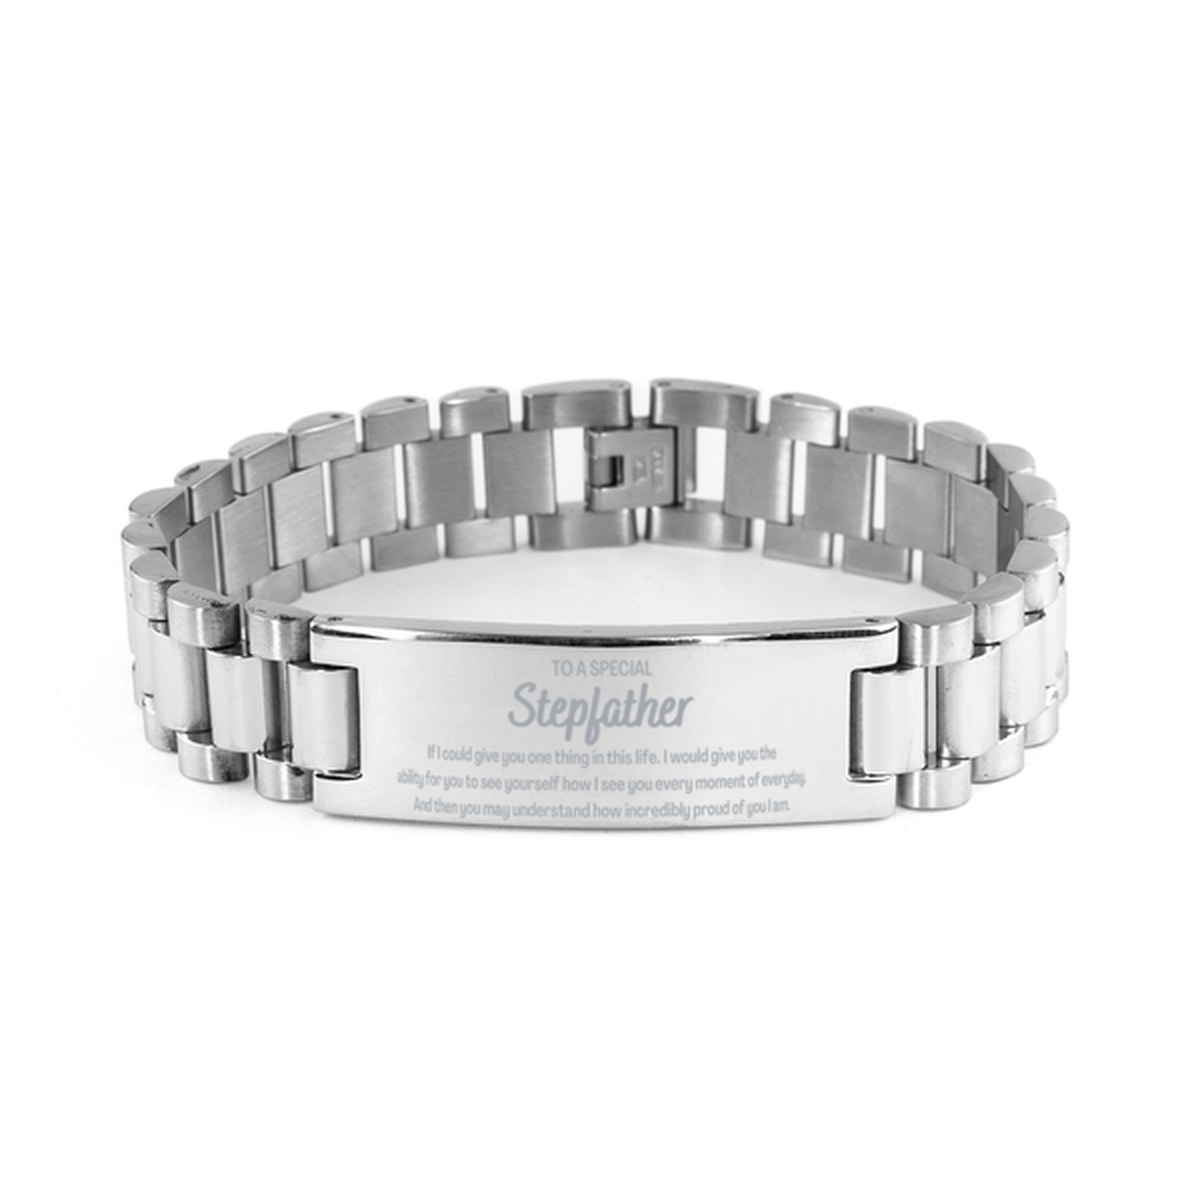 To My Stepfather Ladder Stainless Steel Bracelet, Gifts For Stepfather Engraved, Inspirational Gifts for Christmas Birthday, Epic Gifts for Stepfather To A Special Stepfather how incredibly proud of you I am